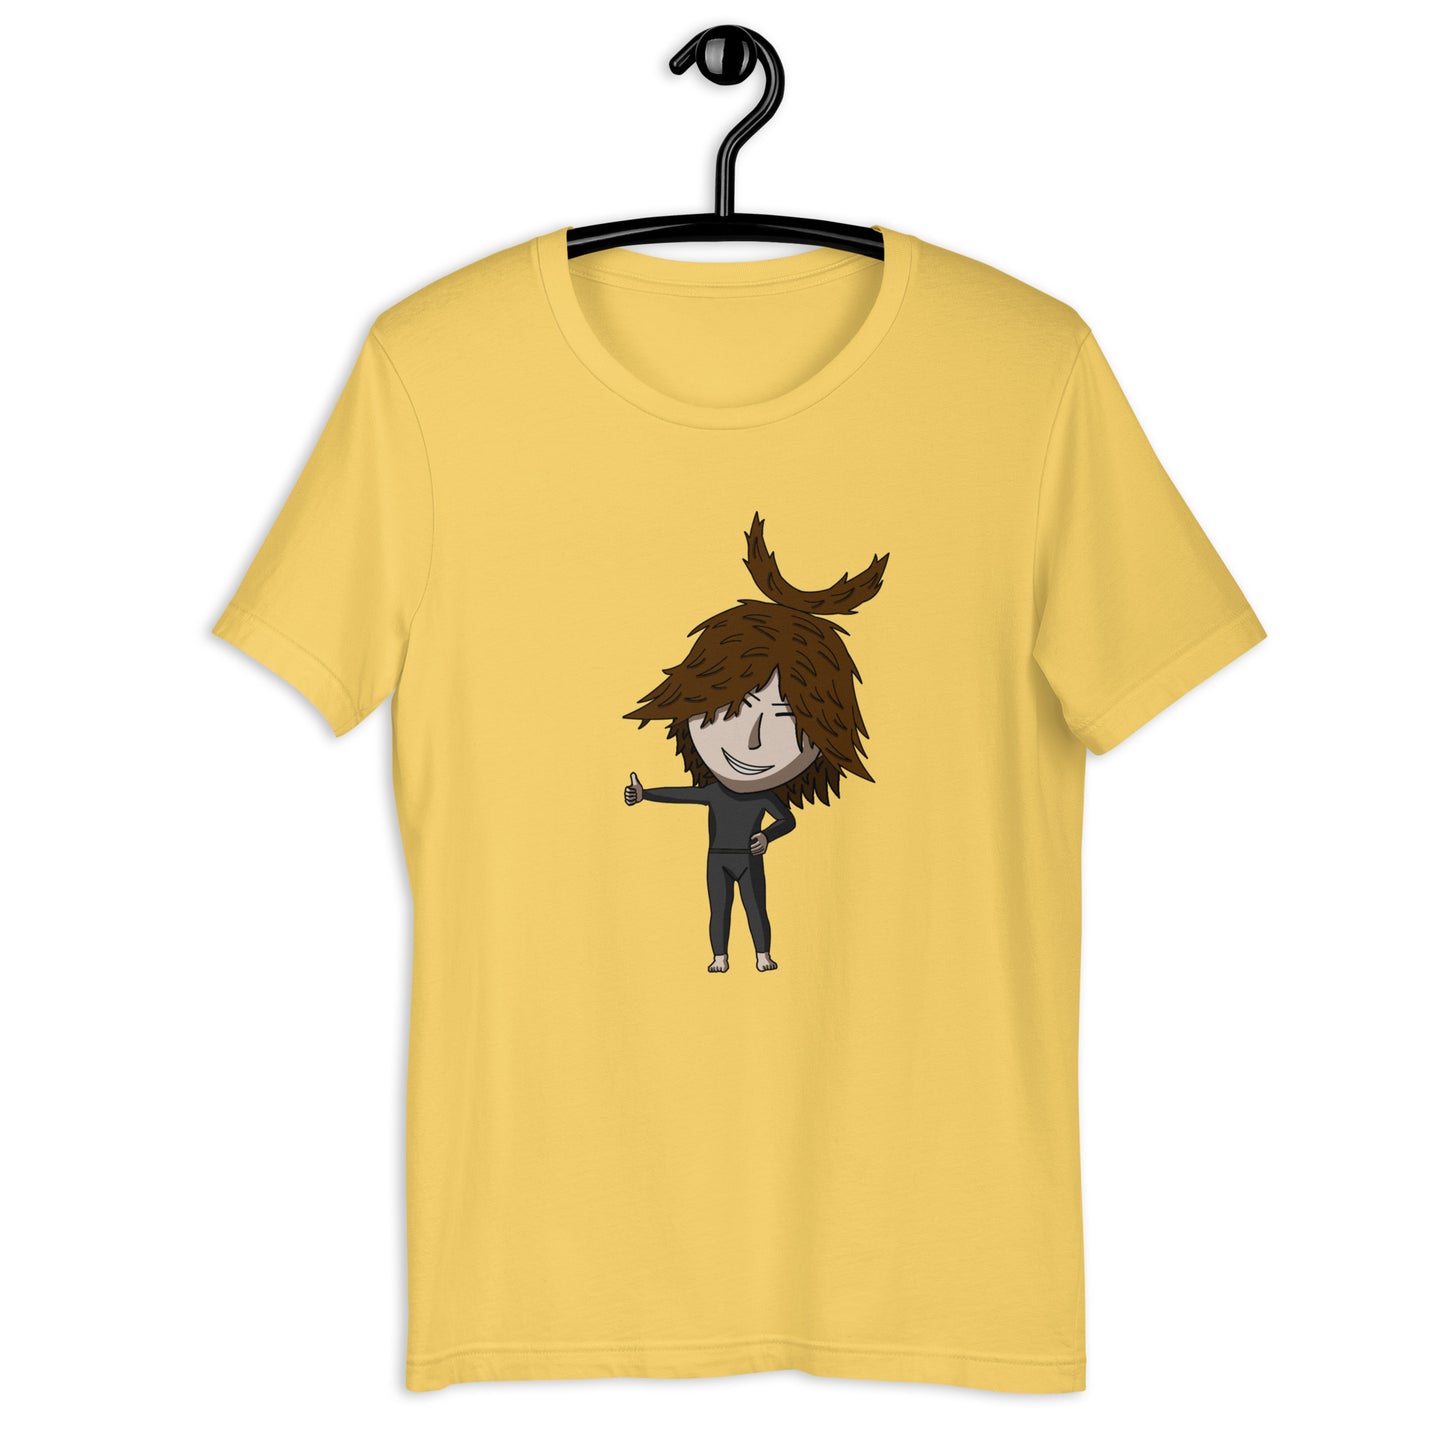 Michael | Chibi character in anime style | T-shirt